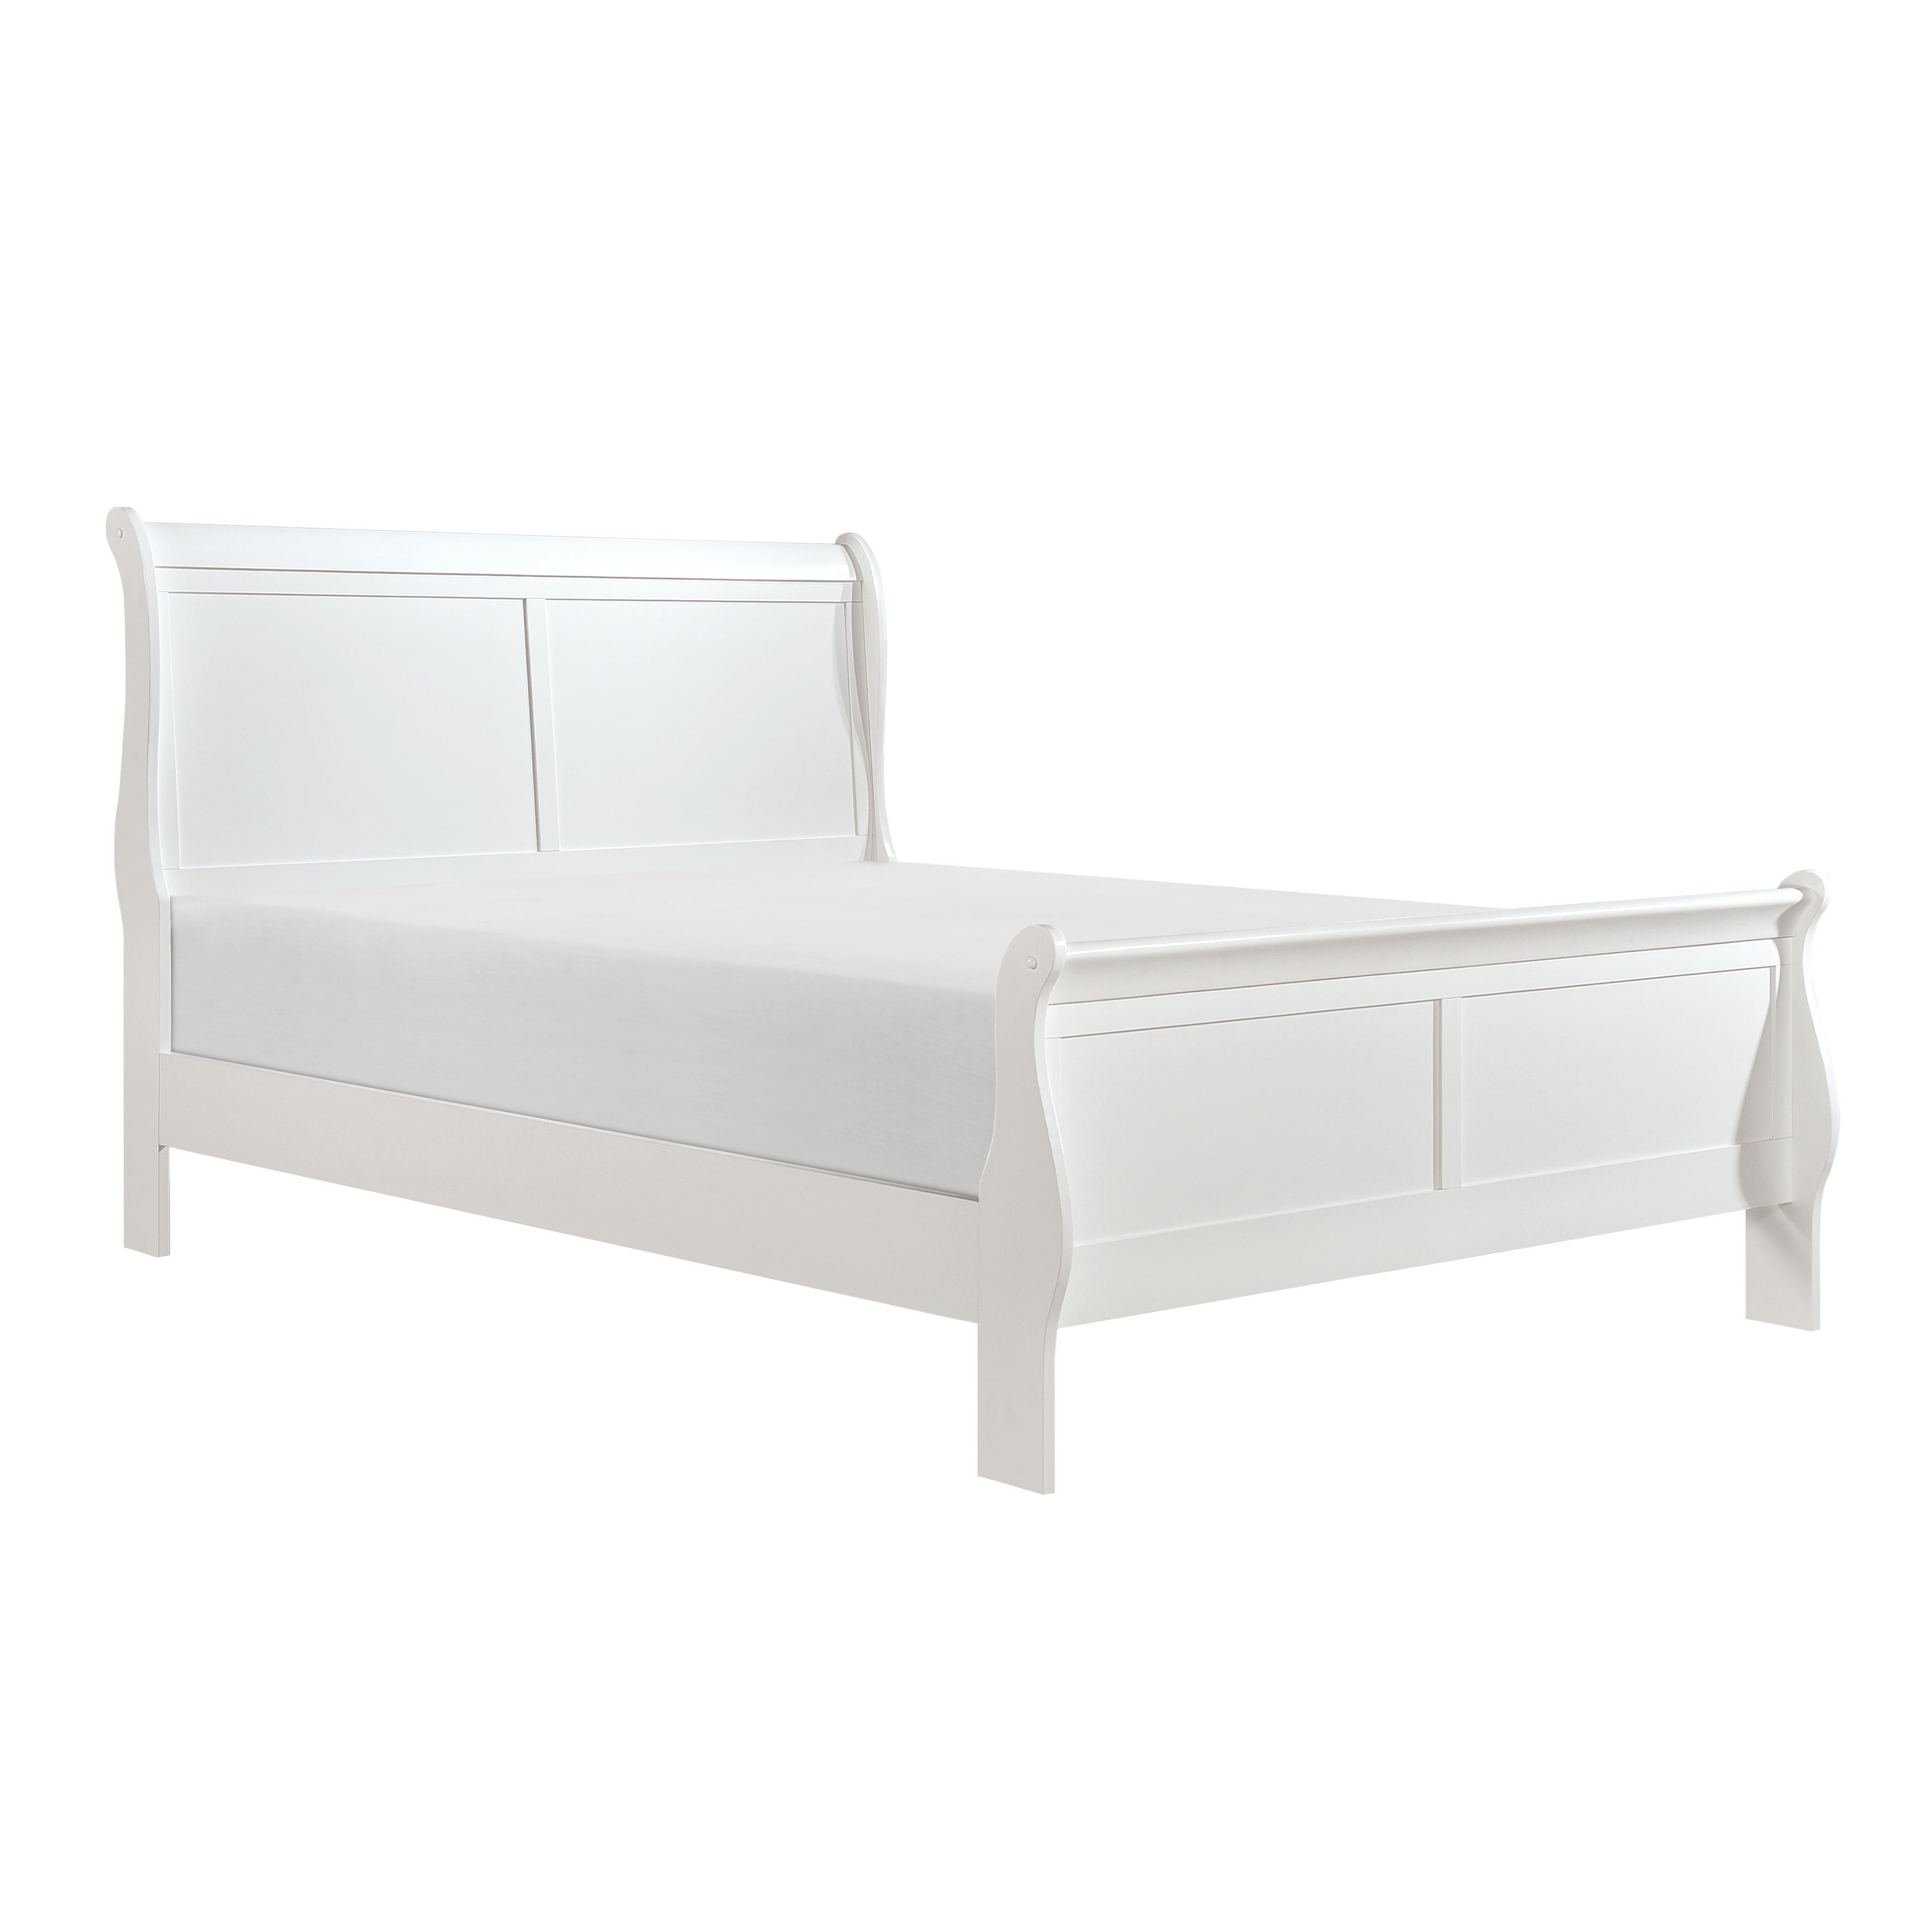 

    
Traditional White Wood CAL Bed Homelegance 2147KW-1CK* Mayville
